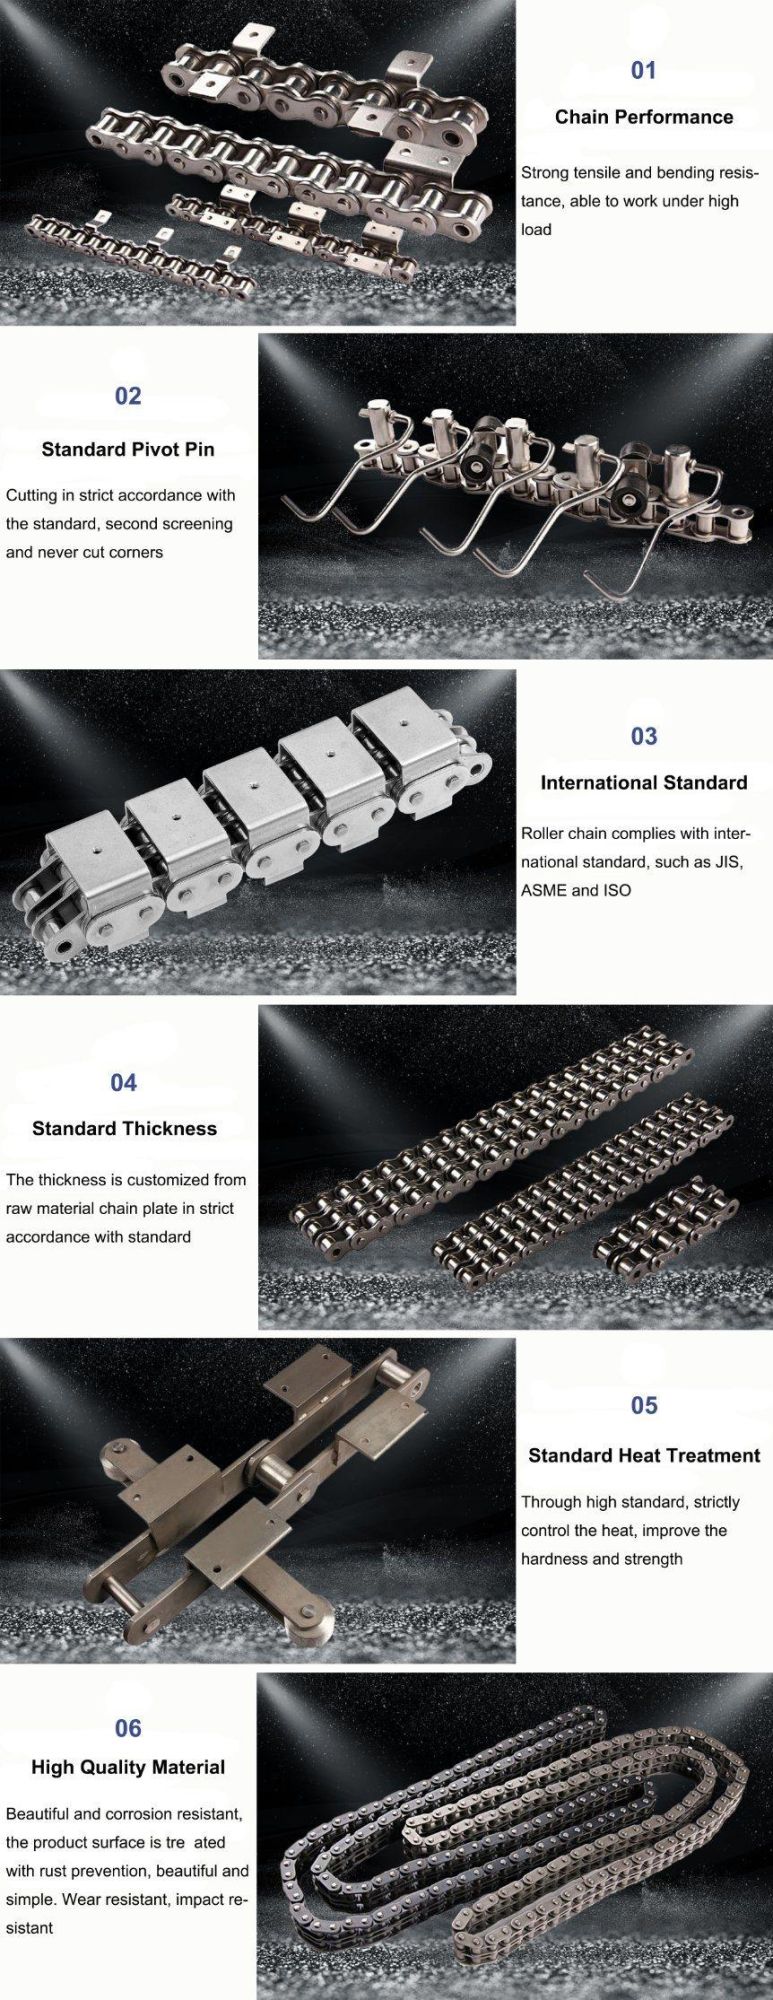 Stainless Steel Hoof Chain River Cleaning Great Wall Mesh Belt Chain Conveyor Mesh Belt Chain